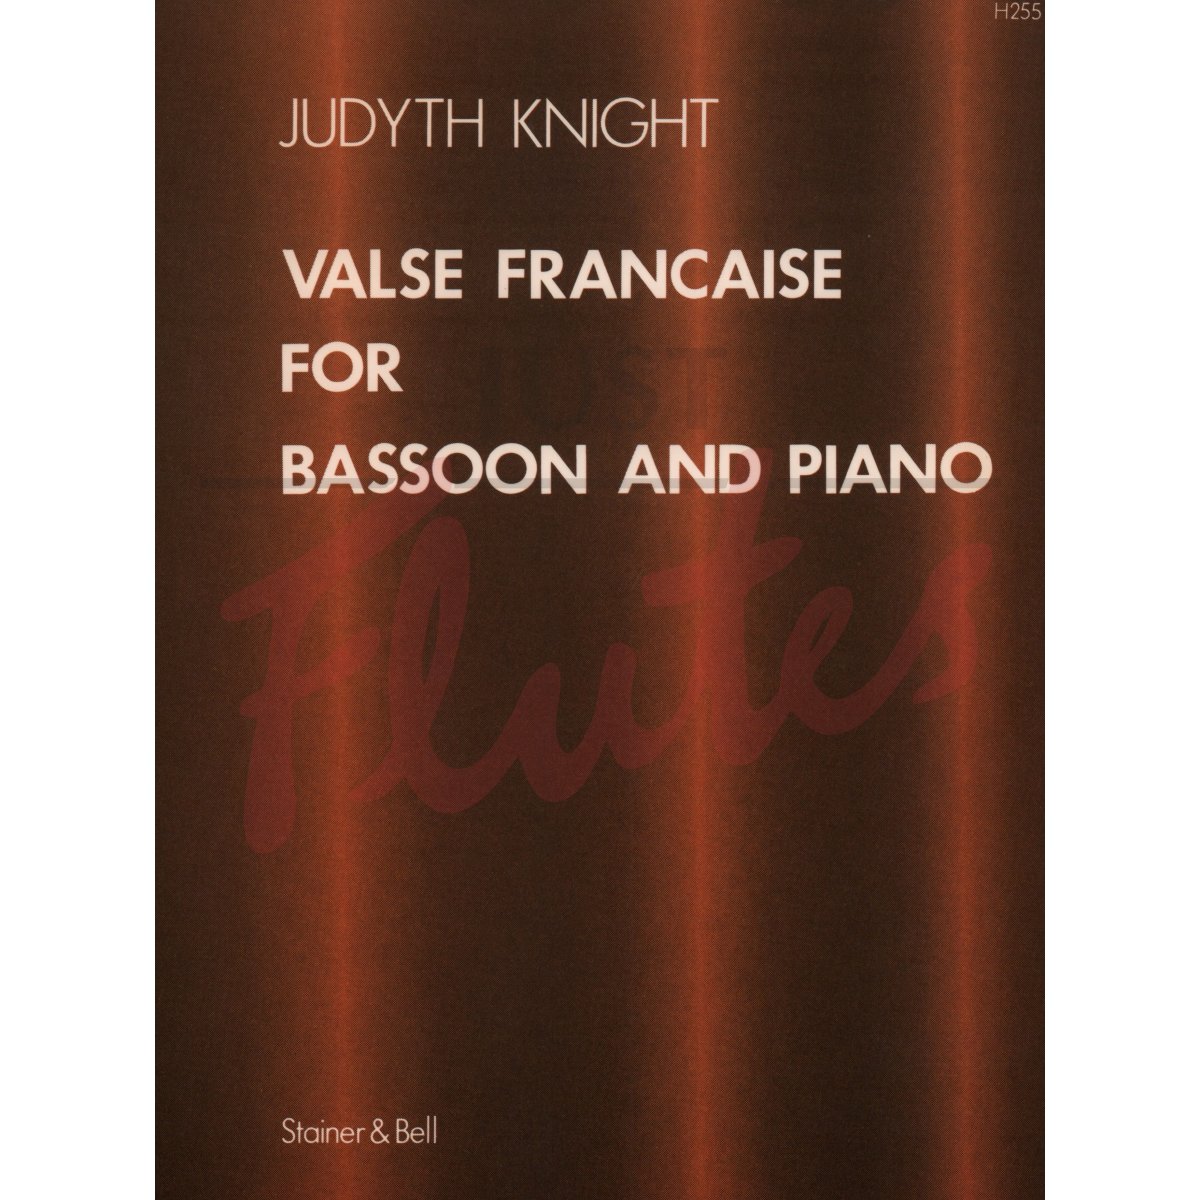 Valse Française for Bassoon and Piano